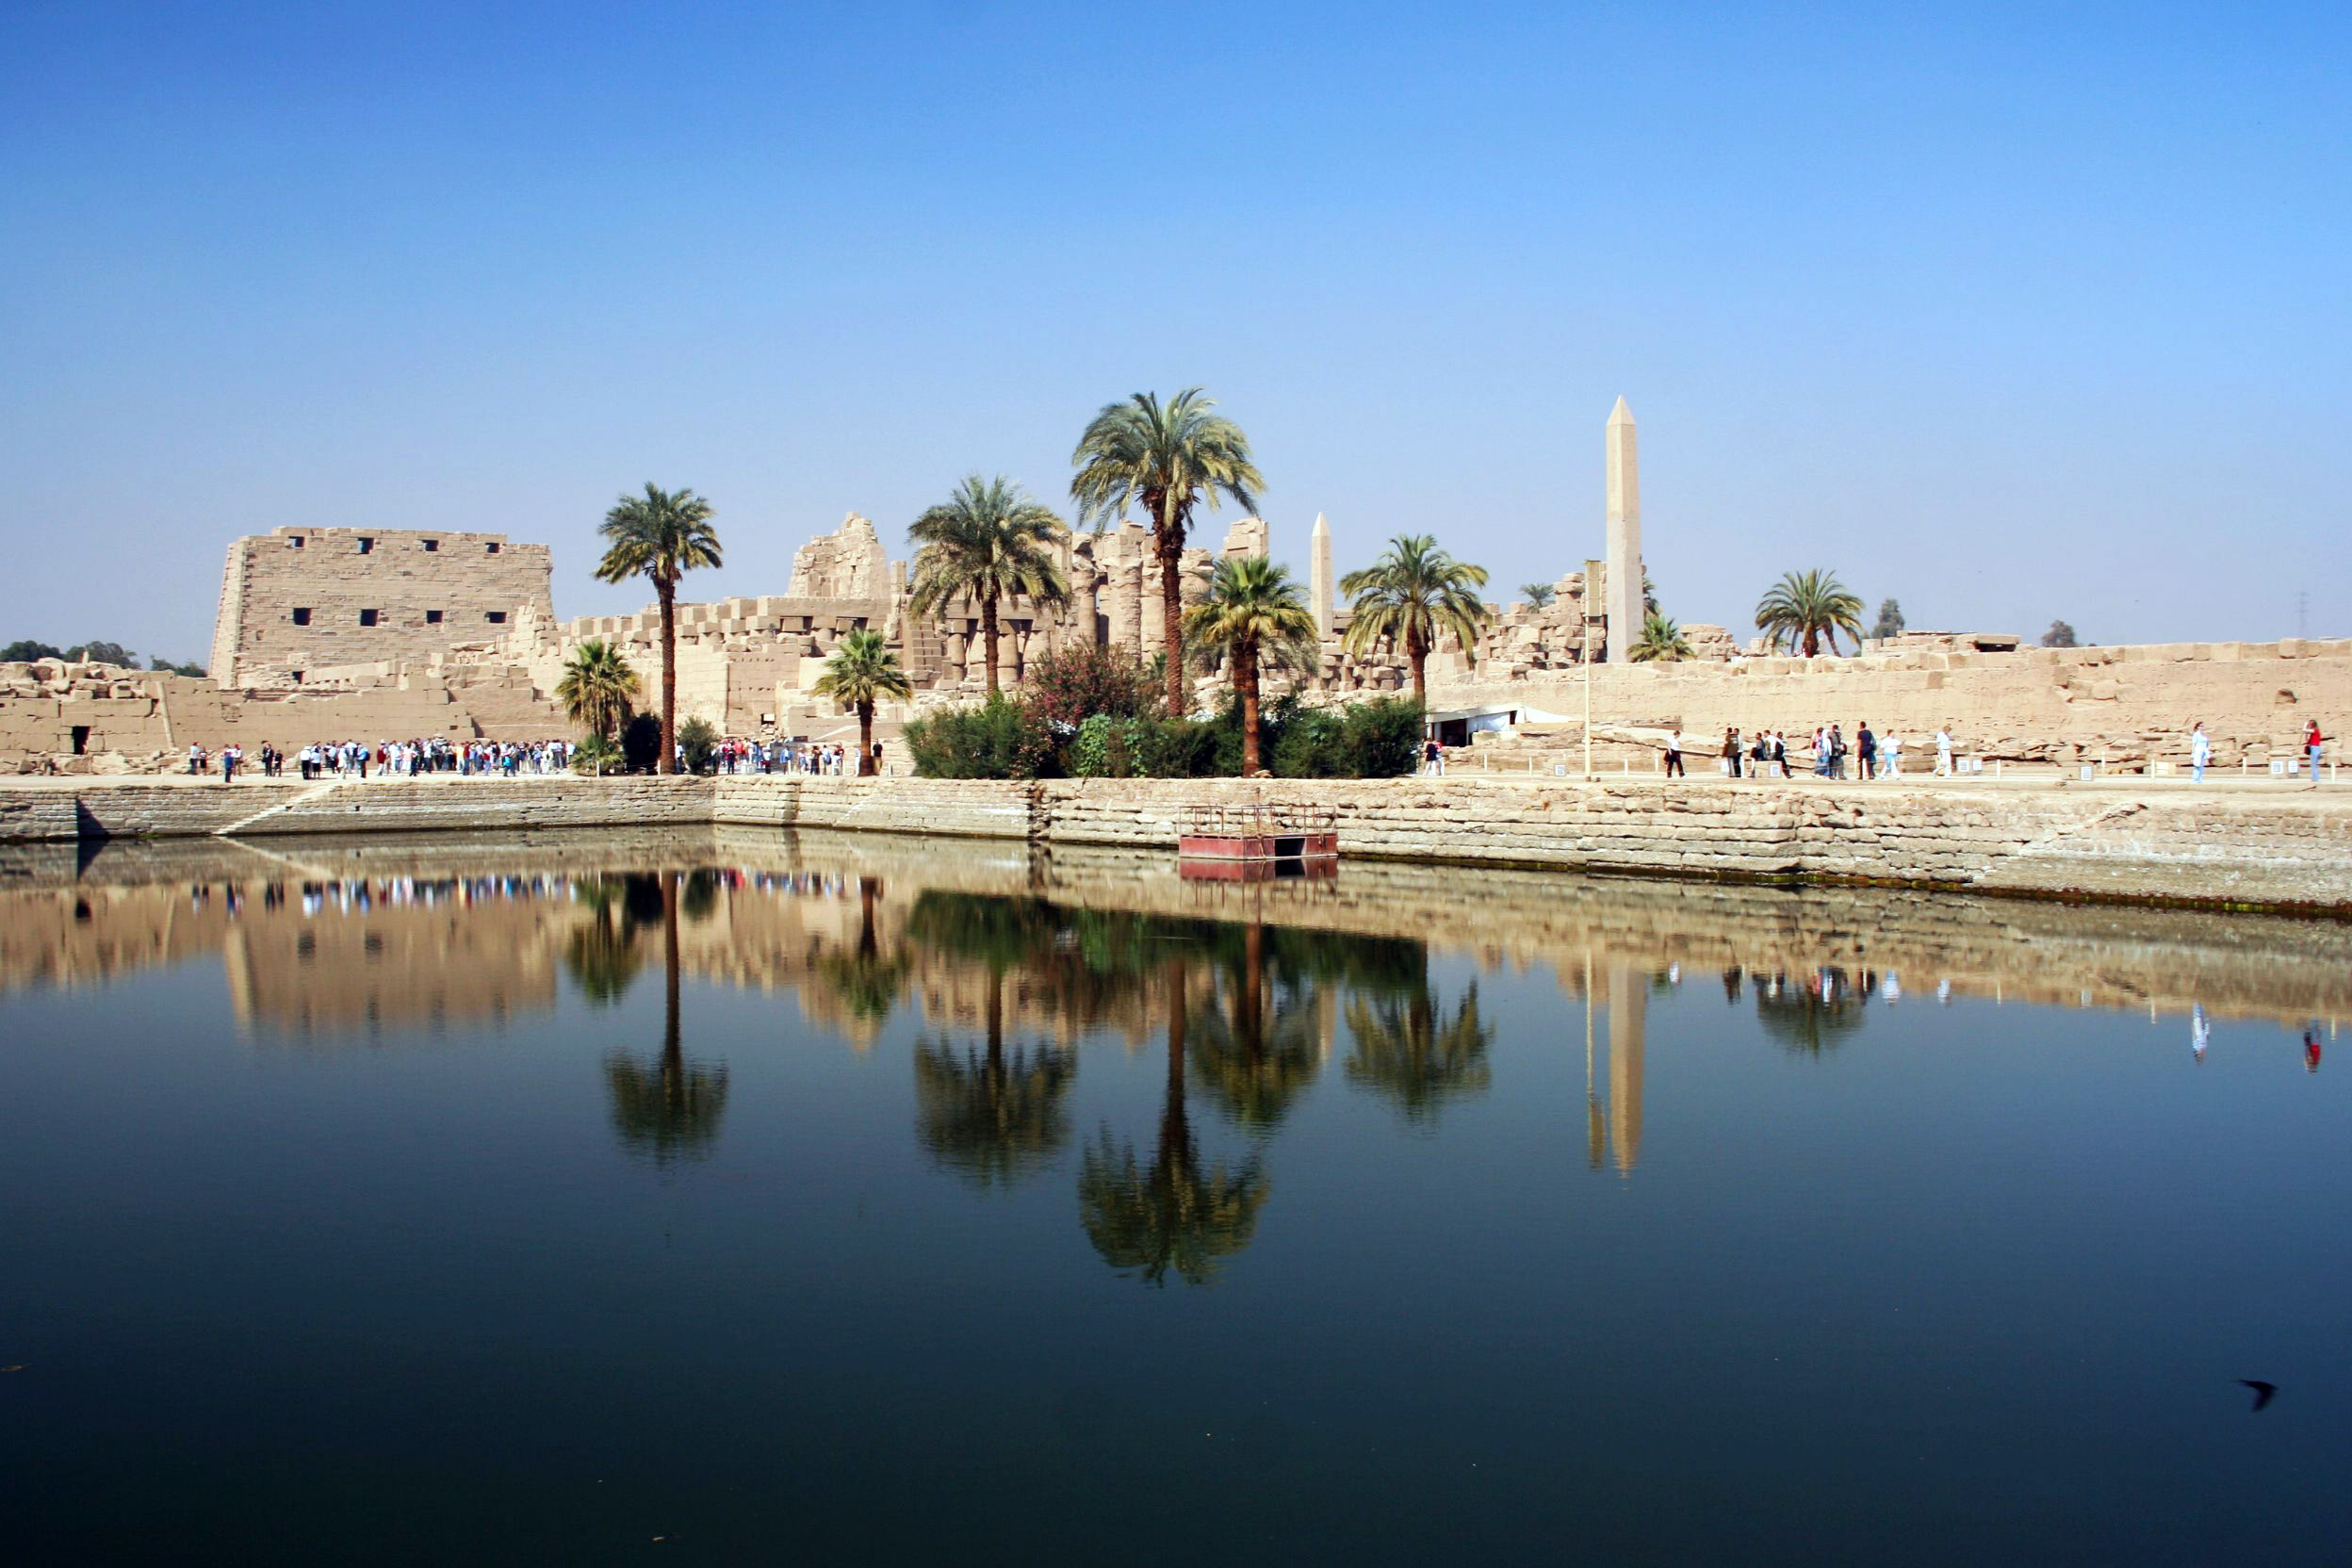 Sacred Lake in the Karnak Temple complex